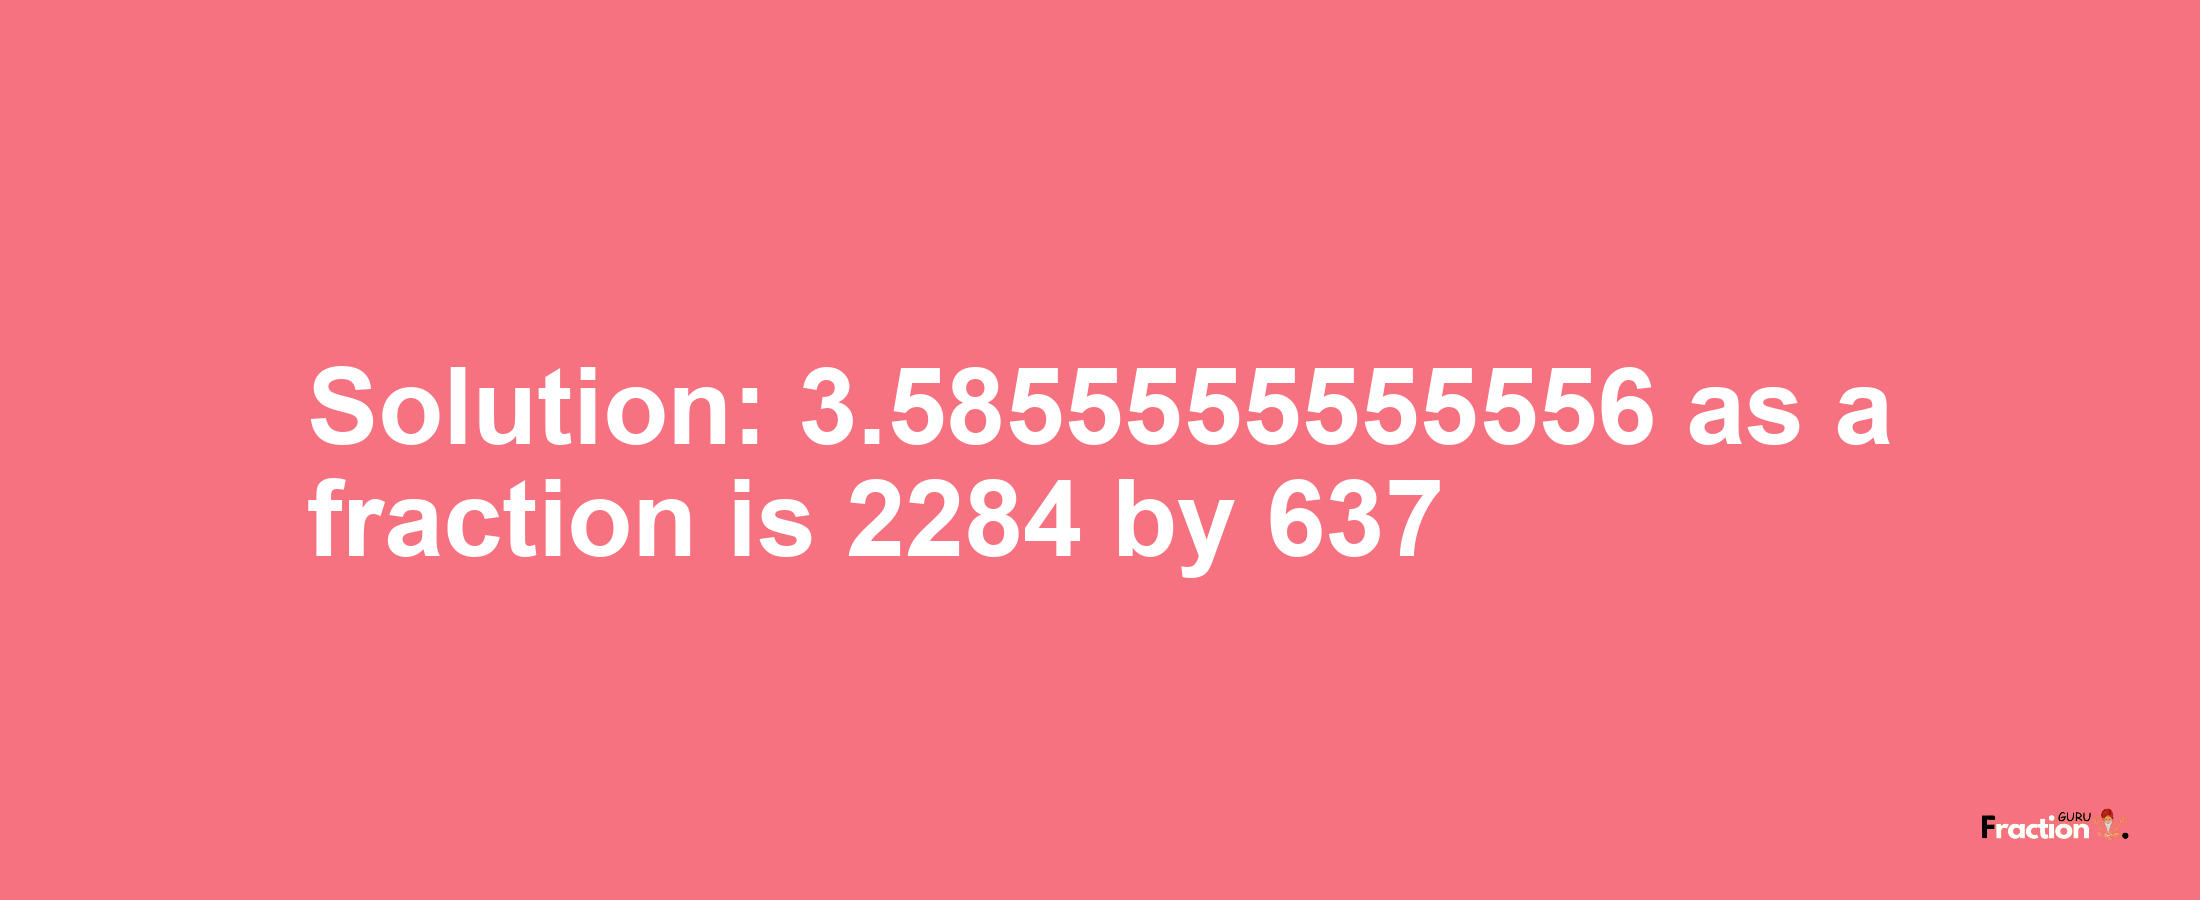 Solution:3.5855555555556 as a fraction is 2284/637